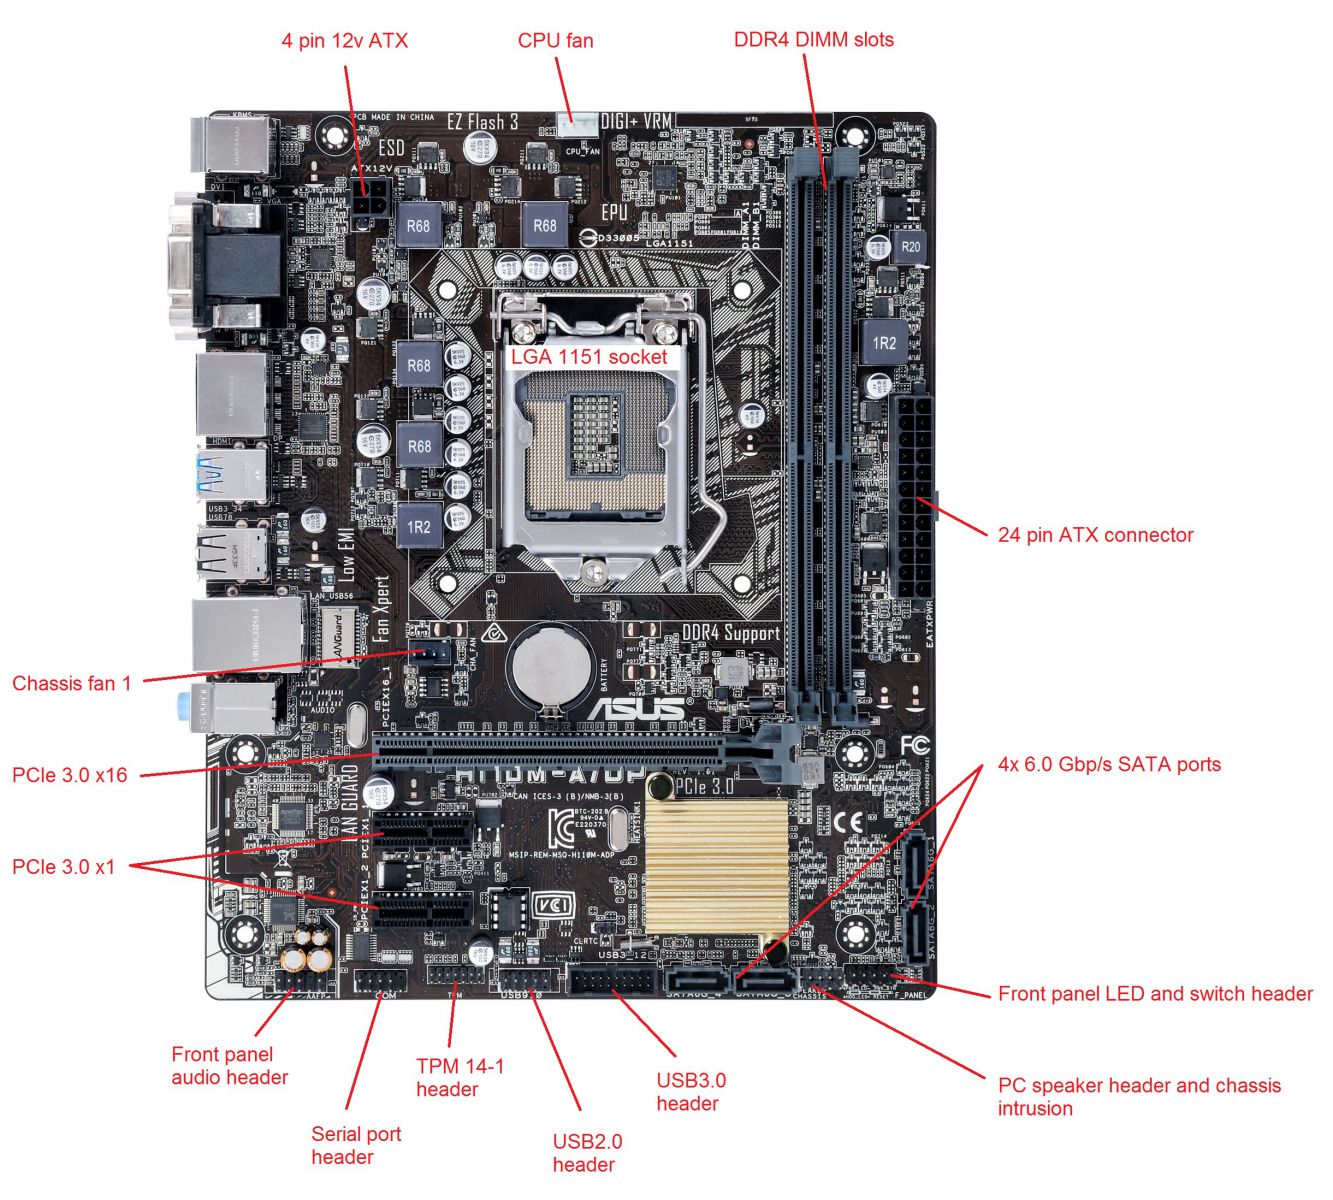 BOAMOT-481 - Stone / Asus H110M-A/DP - Motherboard Specification